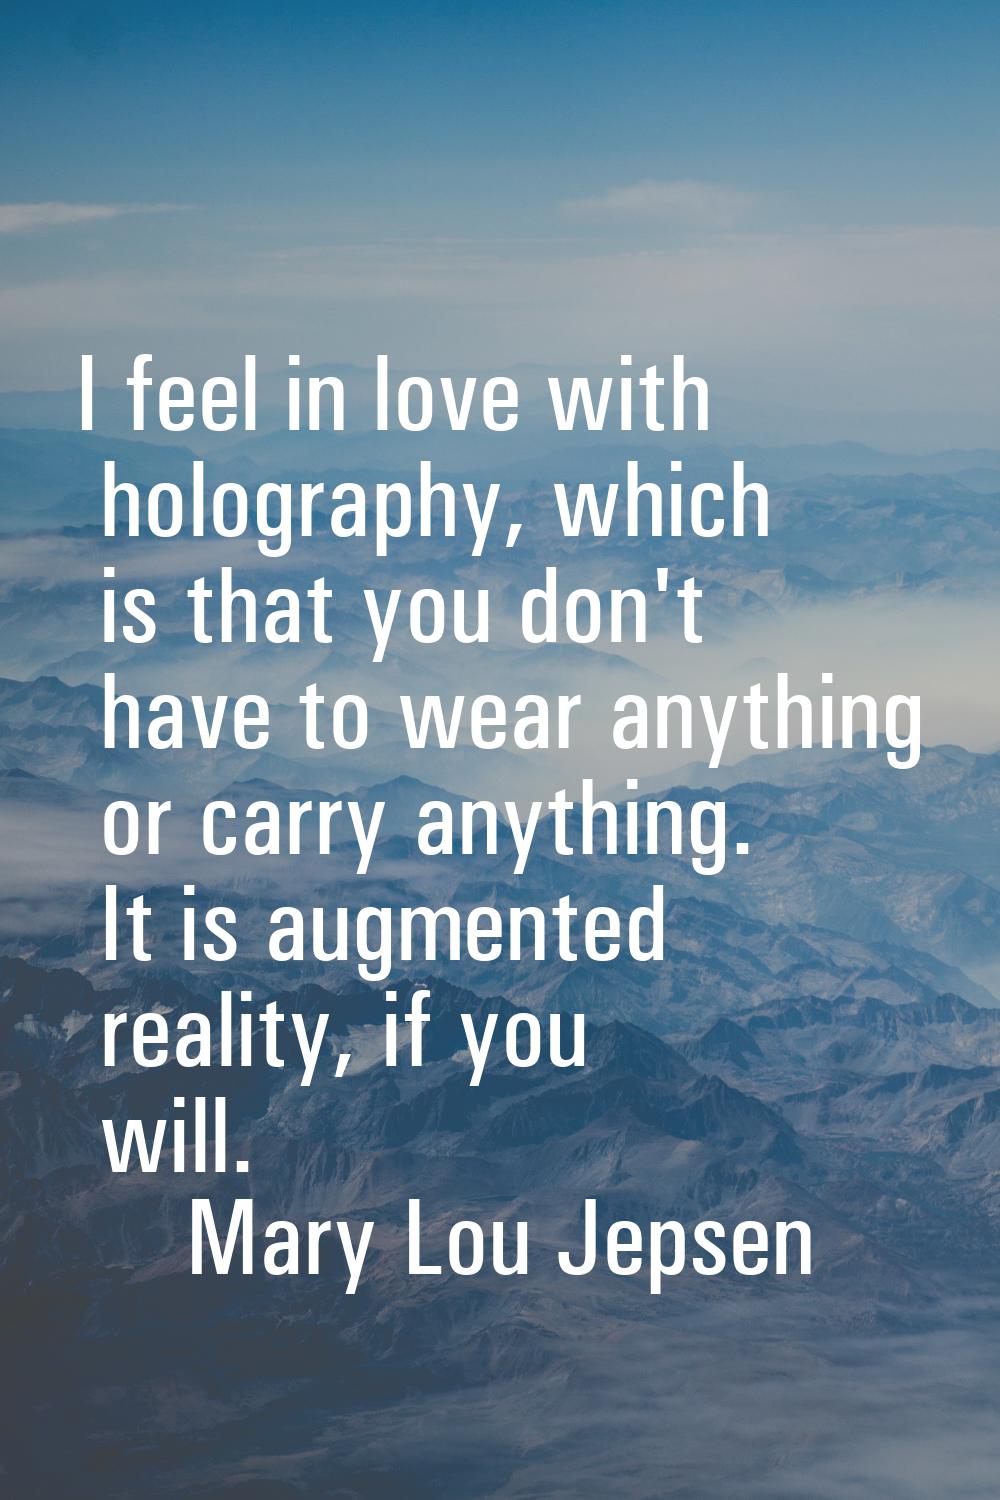 I feel in love with holography, which is that you don't have to wear anything or carry anything. It